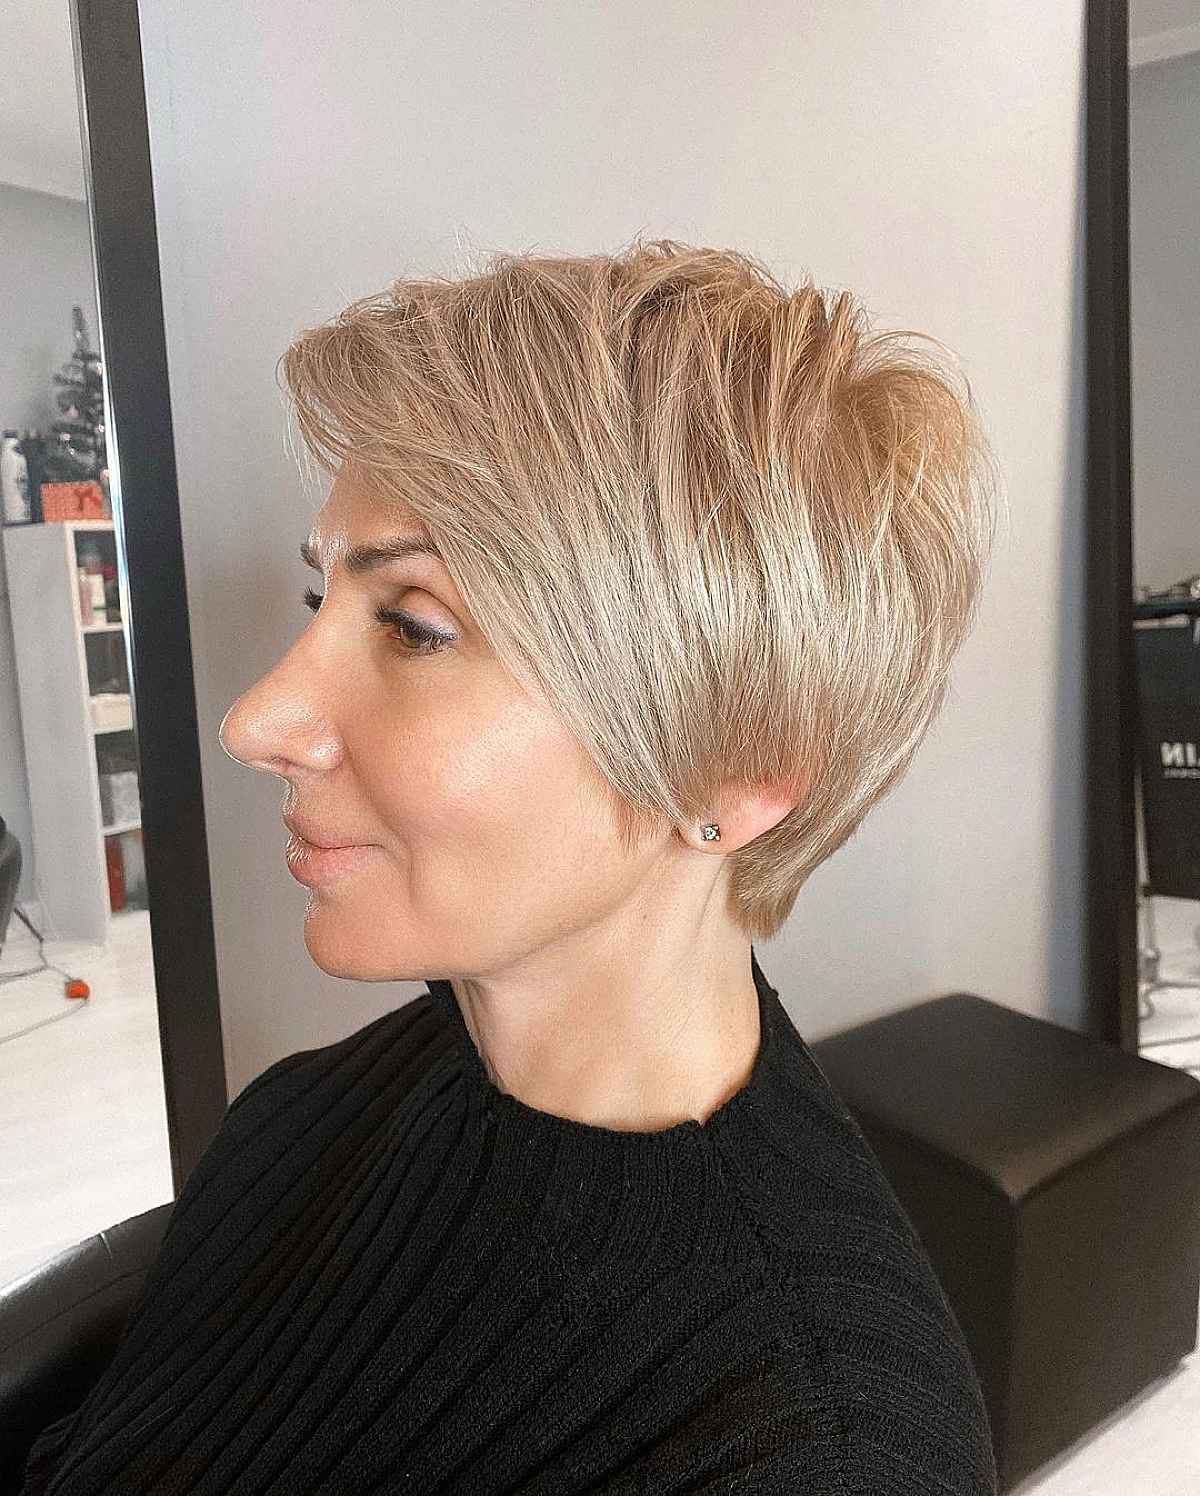 Long Pixie Cut with Side Bangs